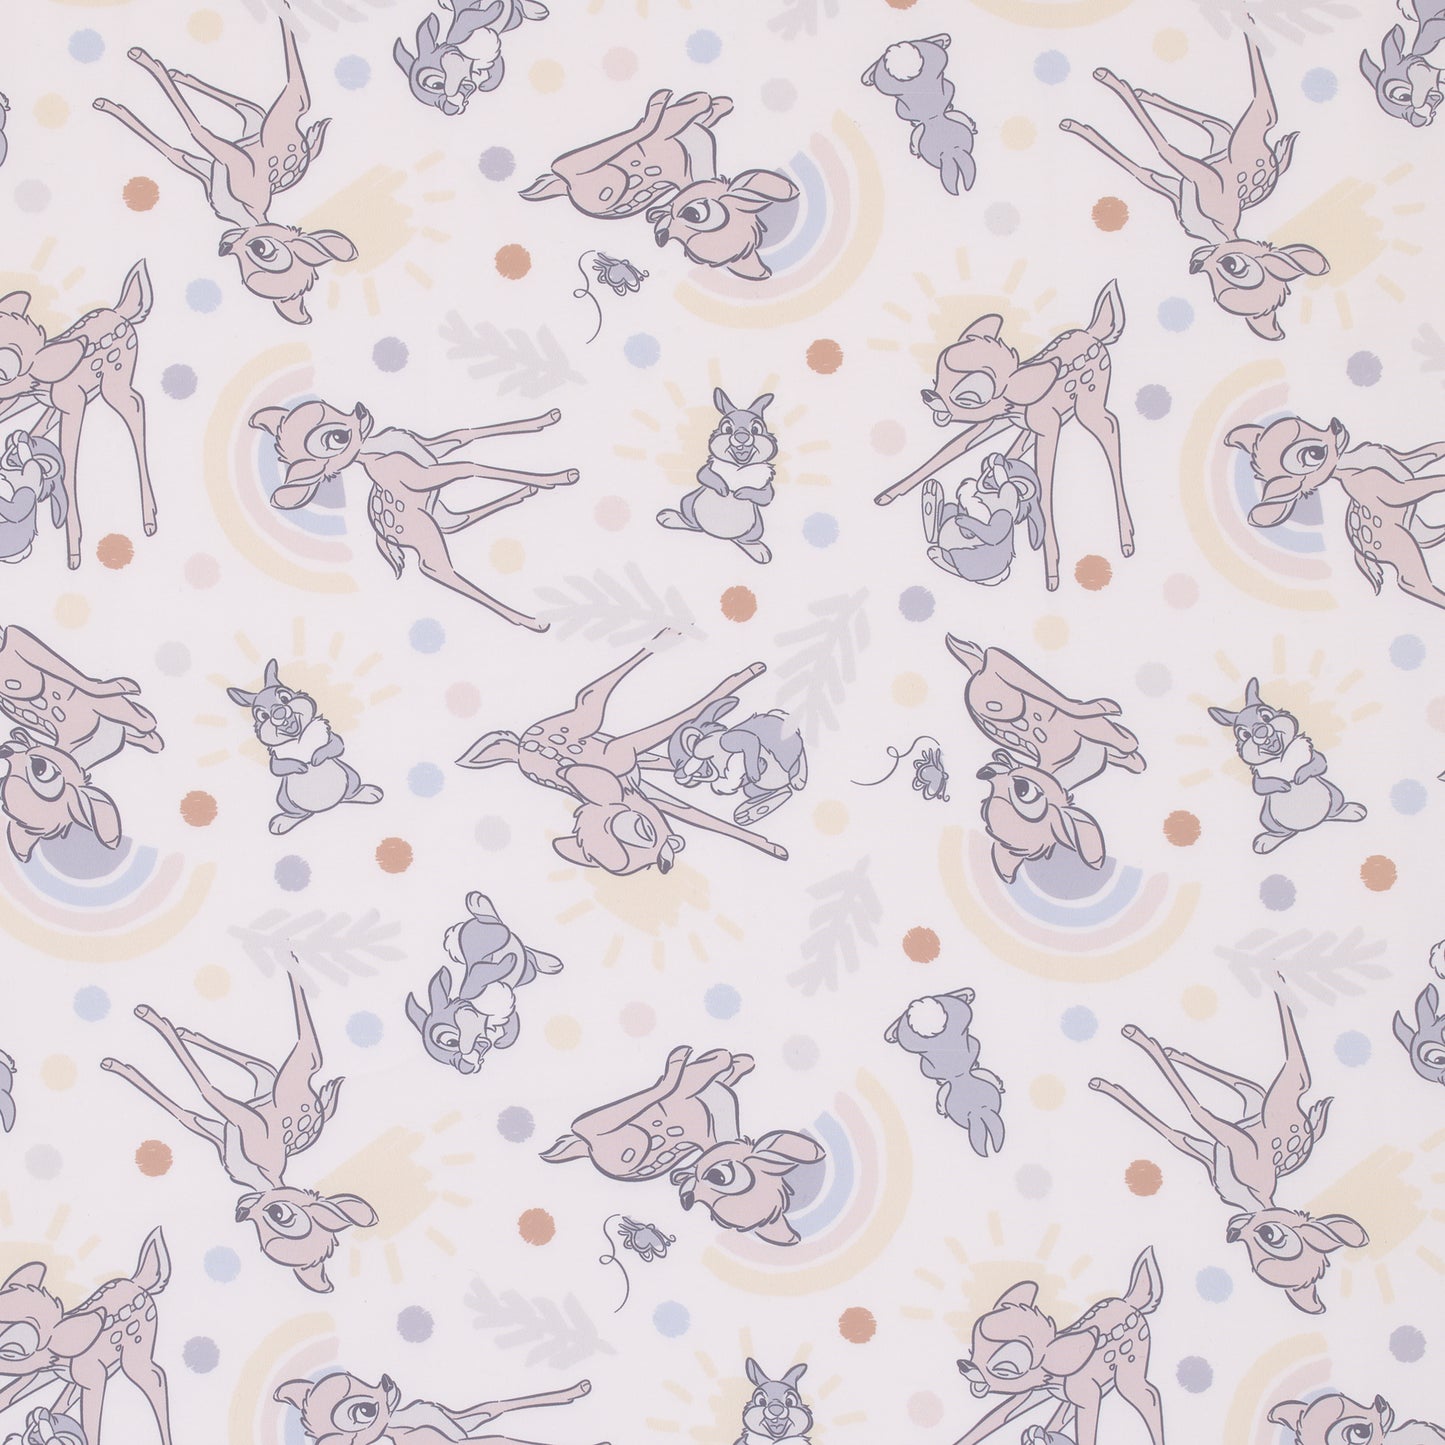 Disney B is for Bambi Tan, Gray, and White Nursery Fitted Crib Sheet